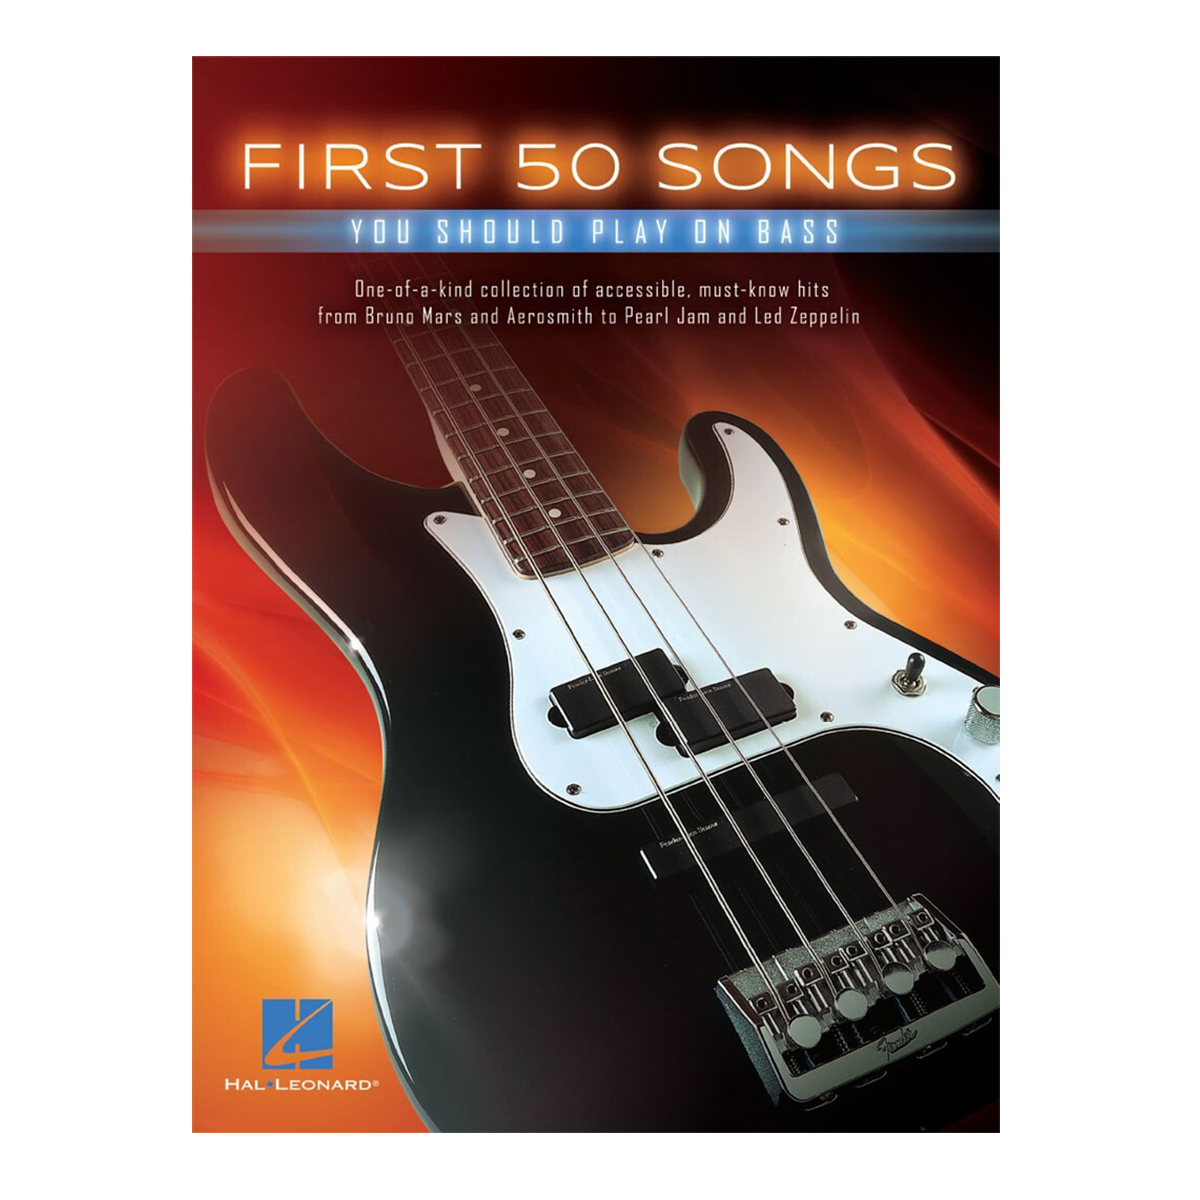 FIRST 50 SONGS YOU SHOULD PLAY ON BASS